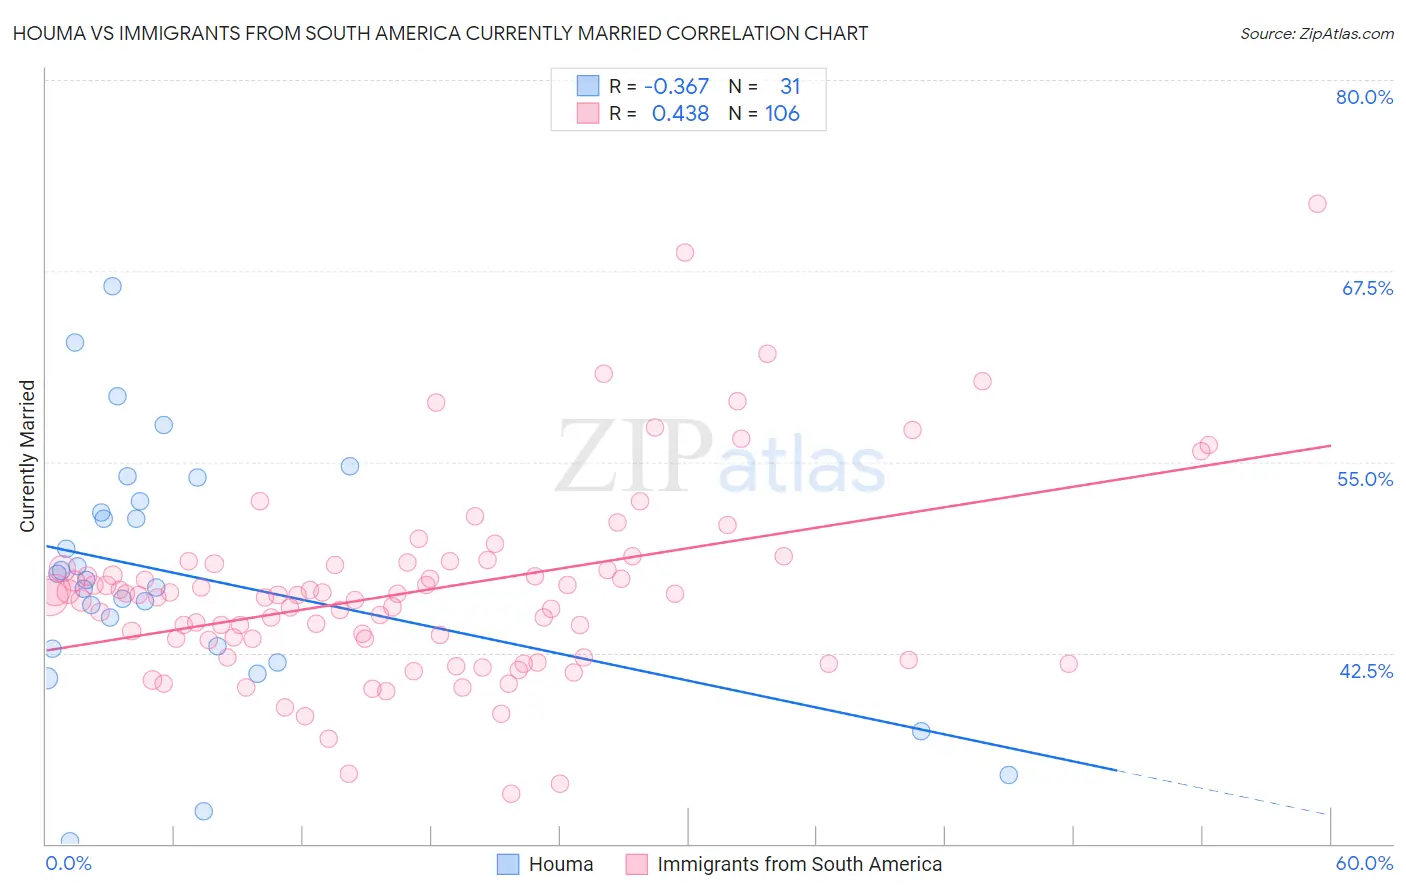 Houma vs Immigrants from South America Currently Married